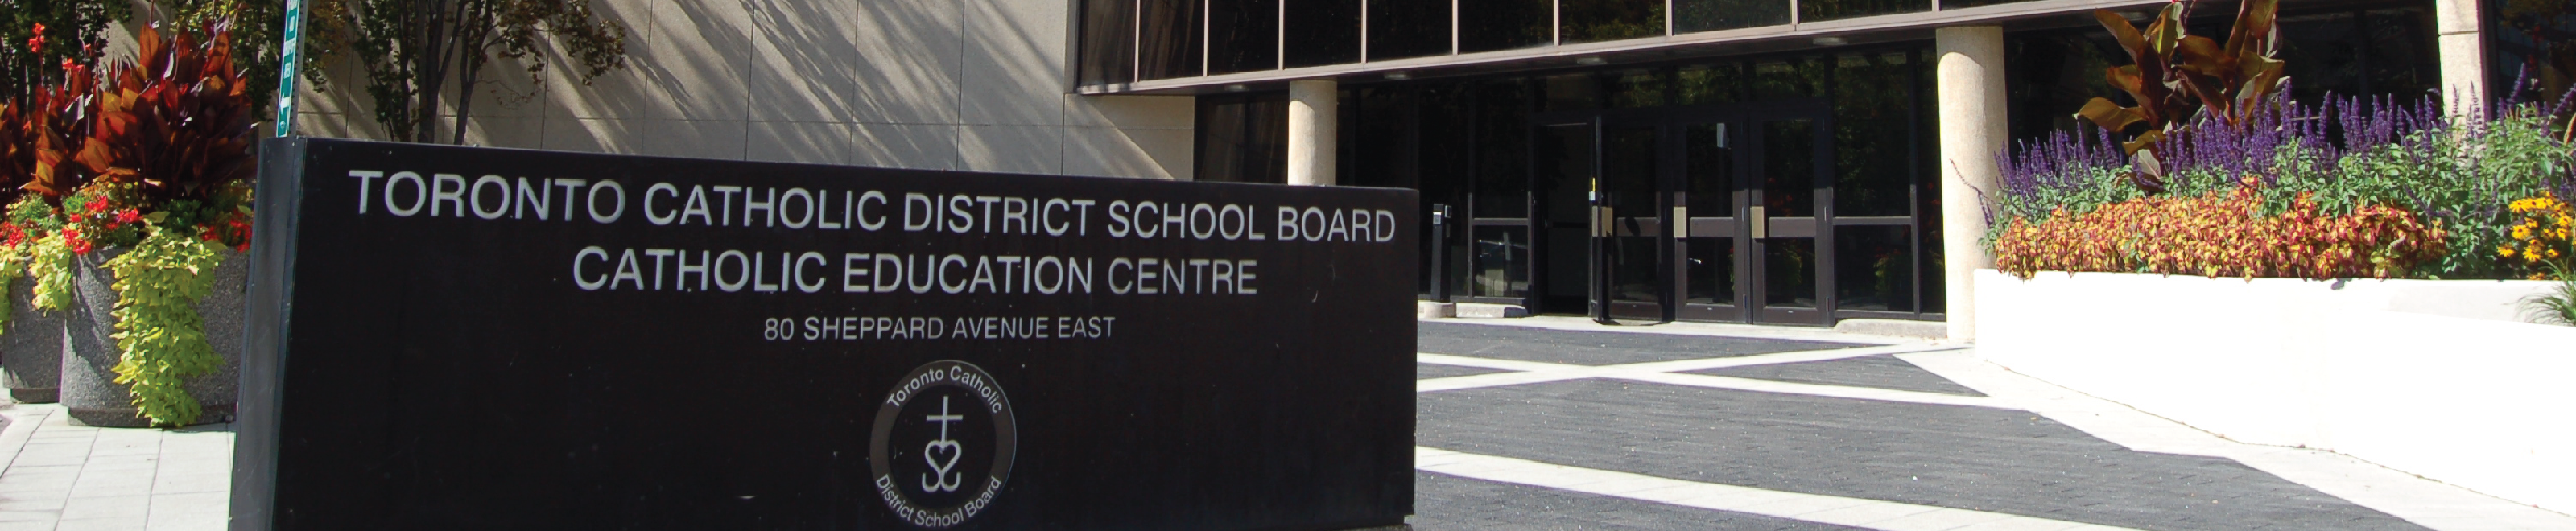 Building sign in front of building for Toronto Catholic District School Board Catholic Education Centre